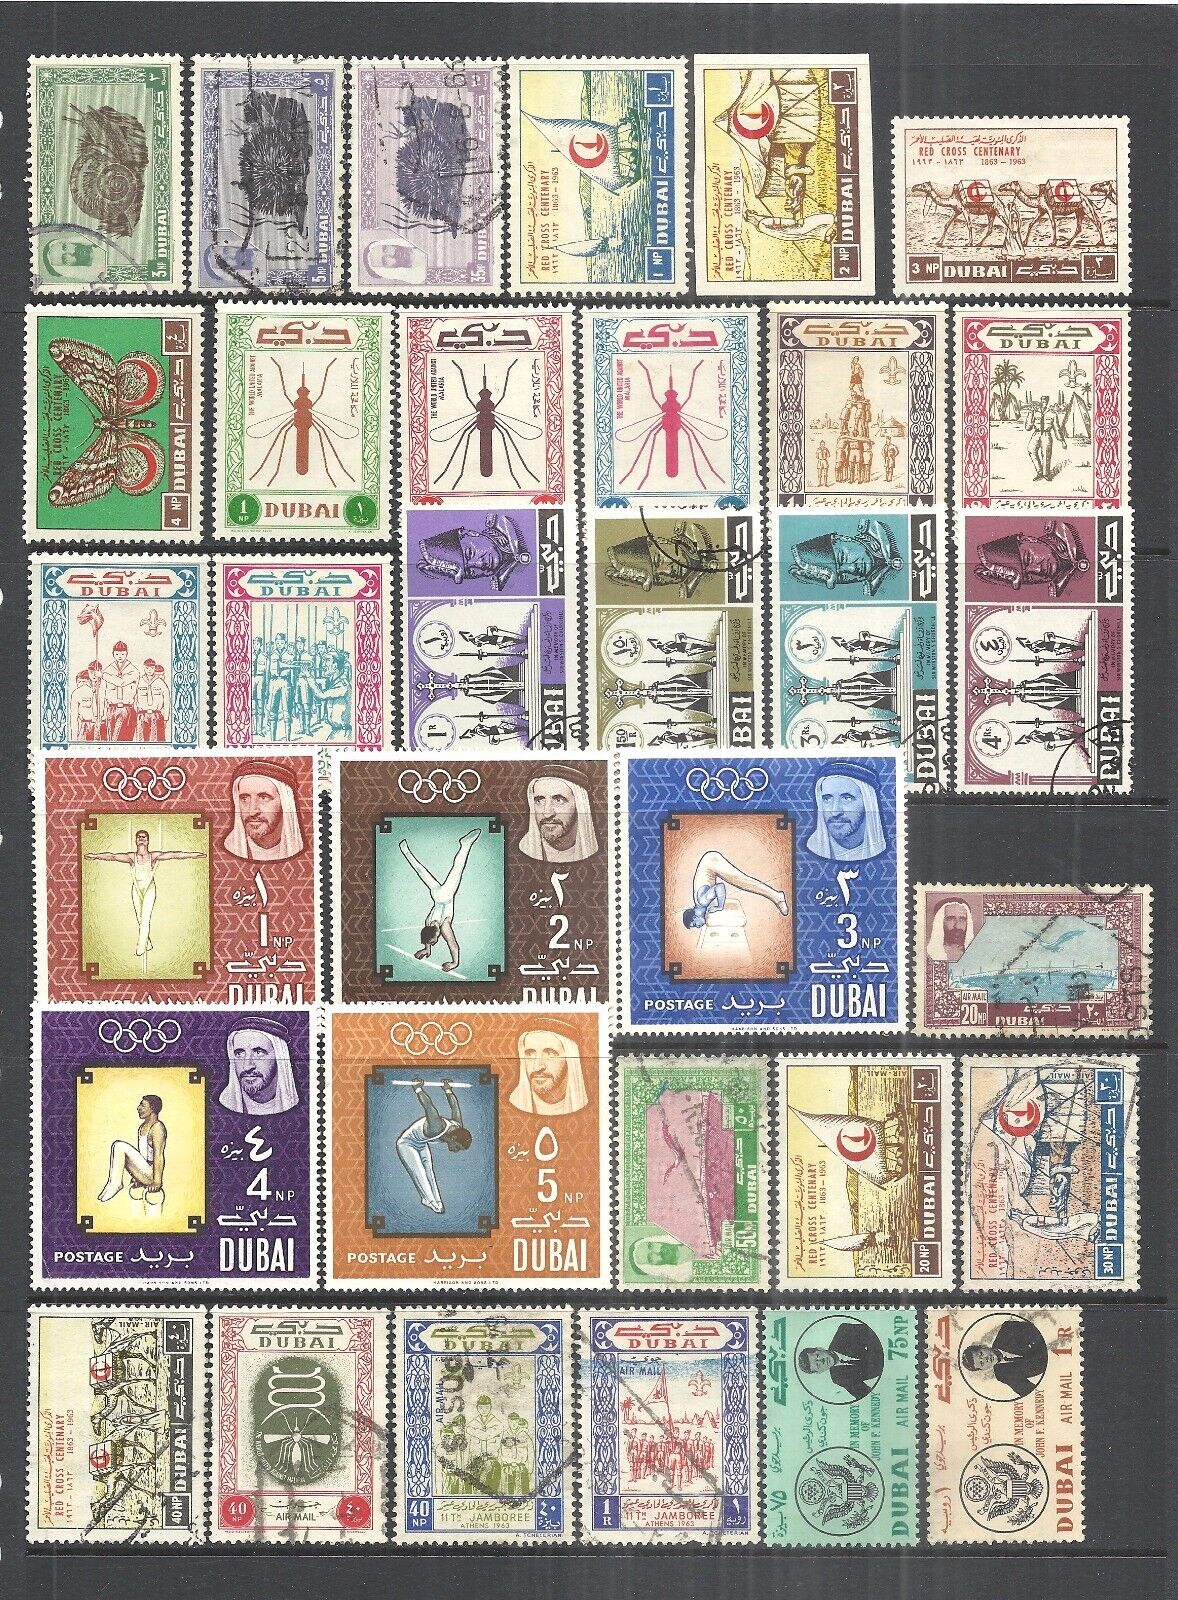 Dubai    Various Mh & Used  Postage & Airmail Issues     1960 - 1965